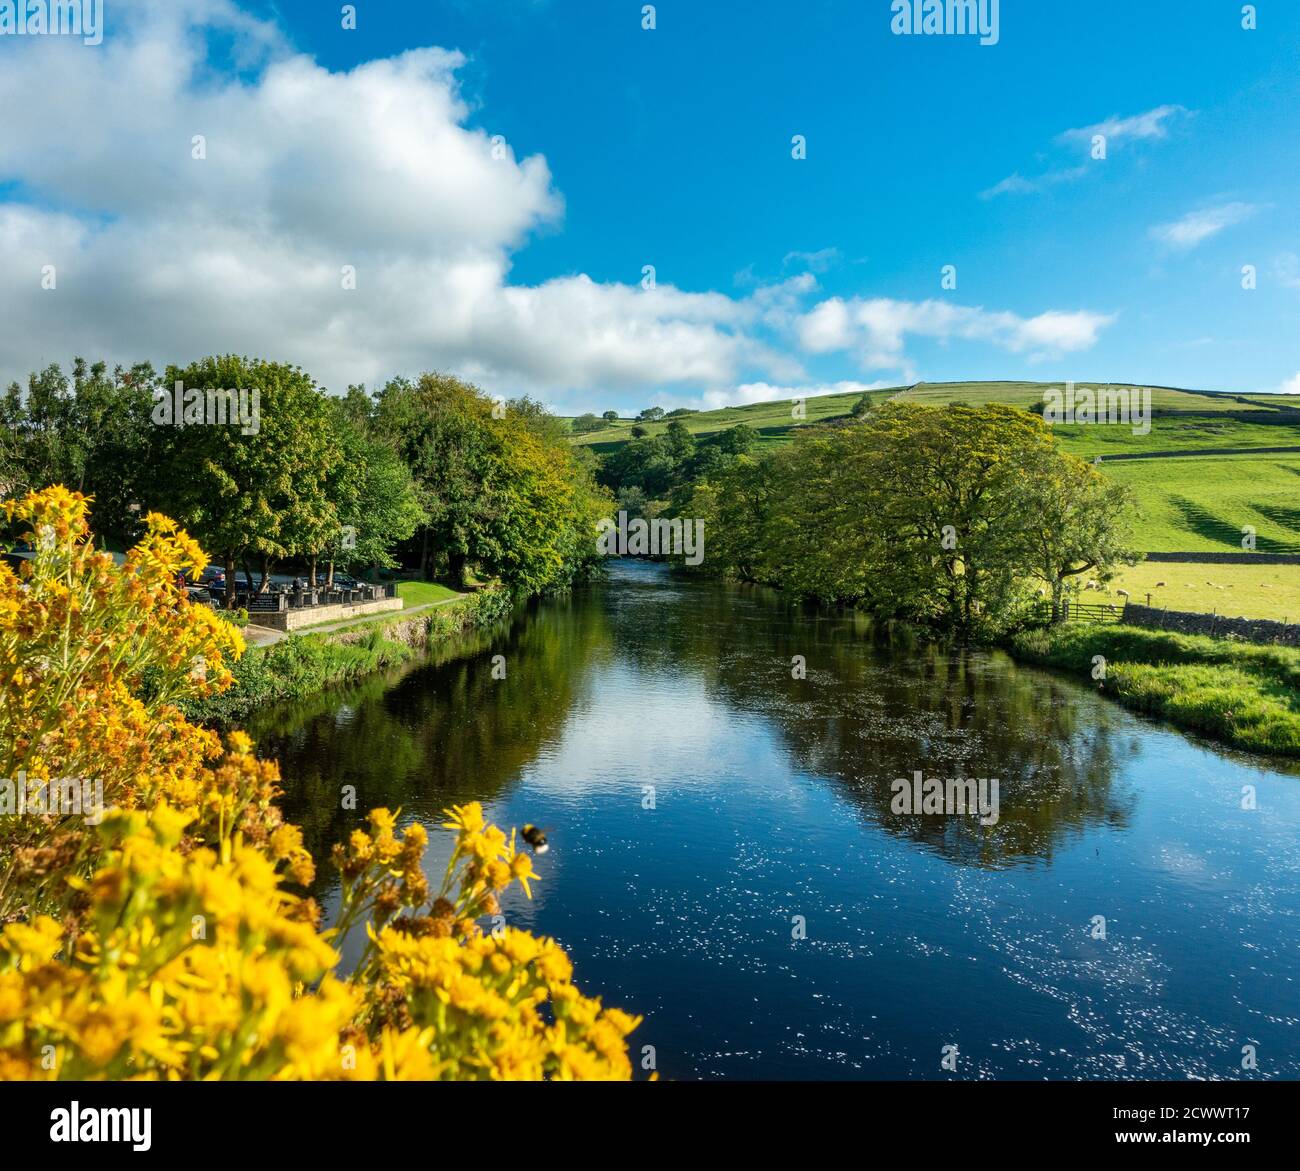 View up the River Wharfe from Burnsall bridge with green fields, yellow ragwort flowers and blue sky, Yorkshire Dales National Park, UK Stock Photo